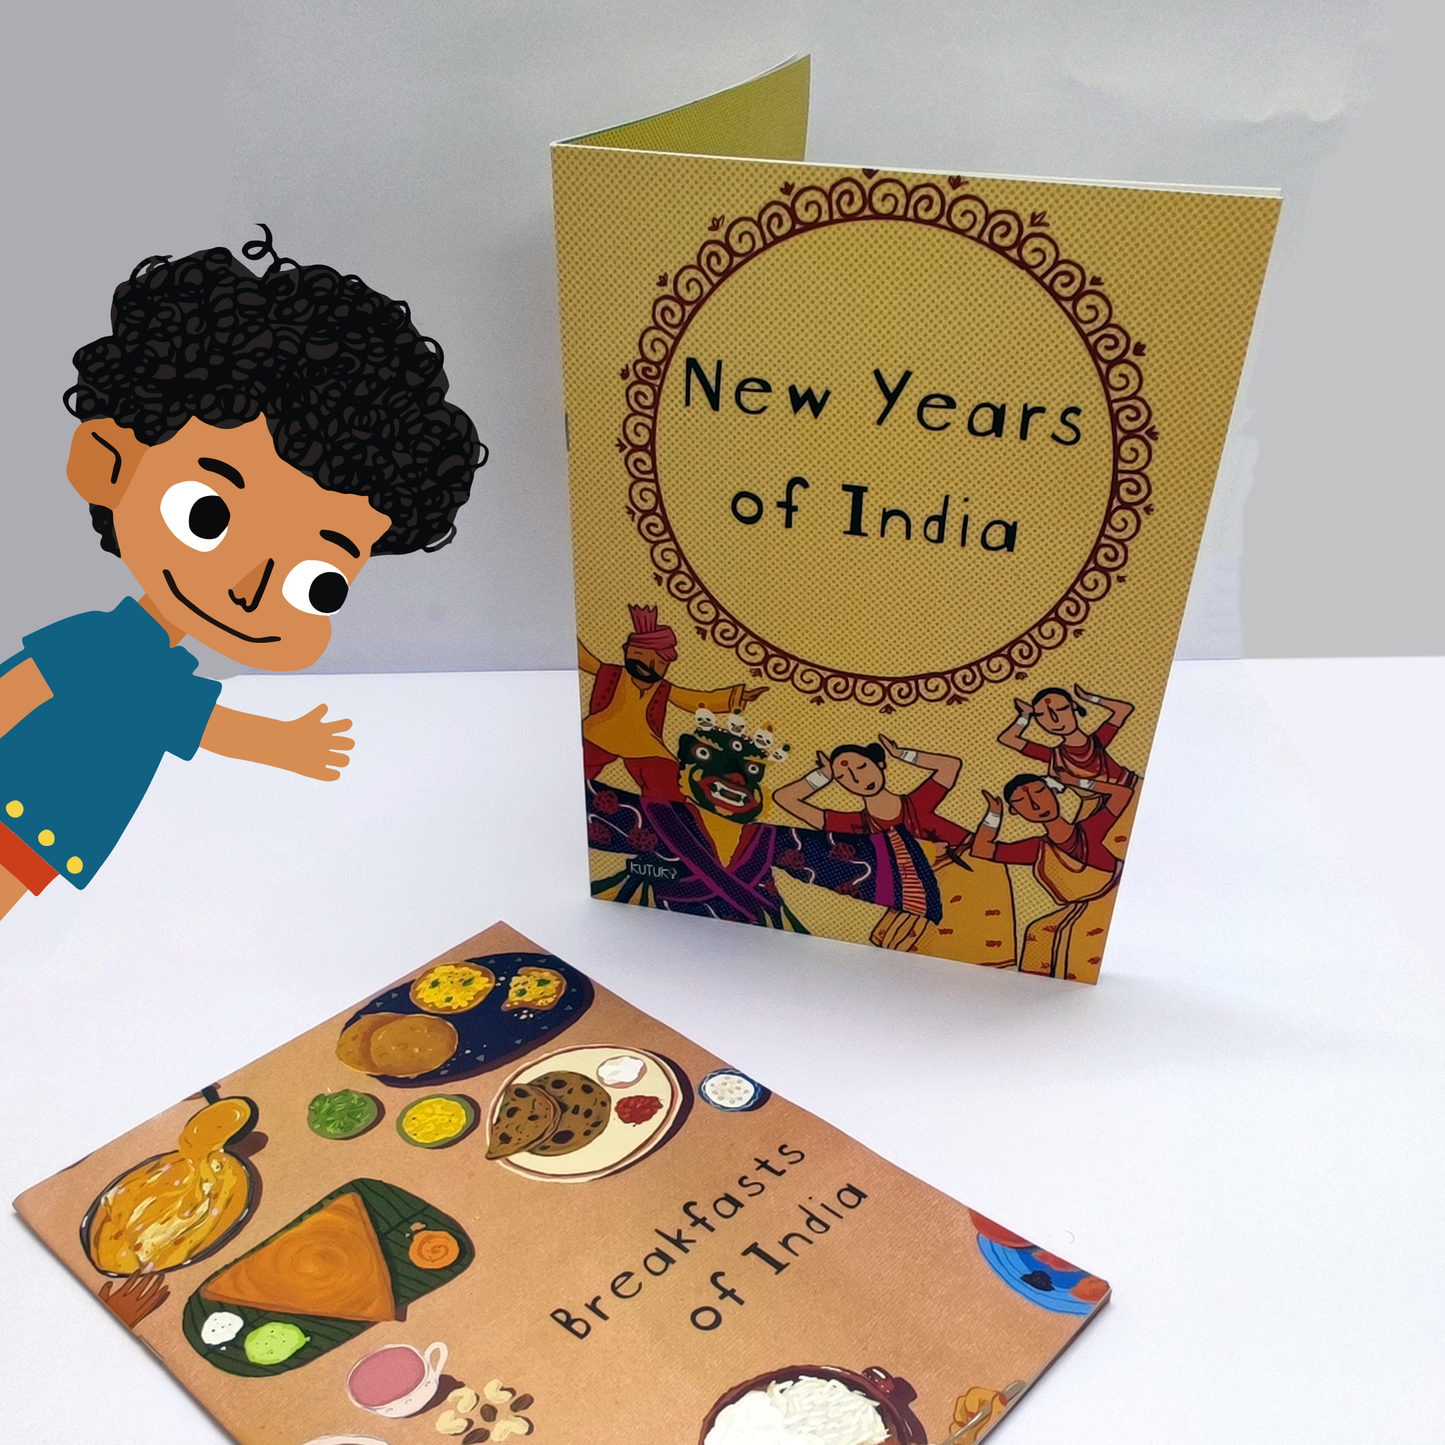 2 Books - Breakfasts & New Years of India